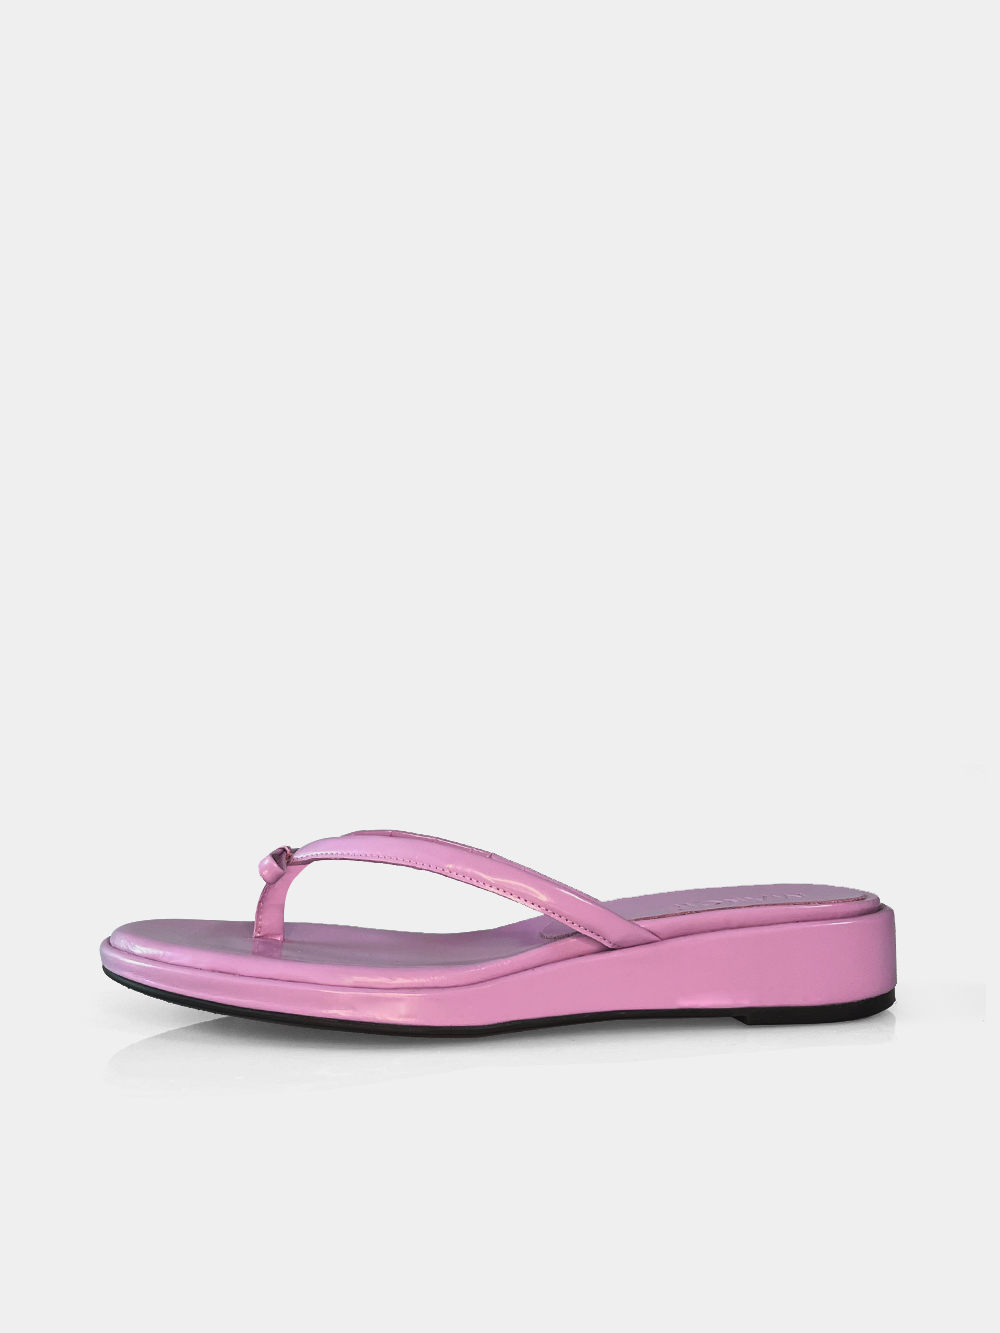 [Out of stock] Mrc104 Ribbon Flip Flops (Lilac)